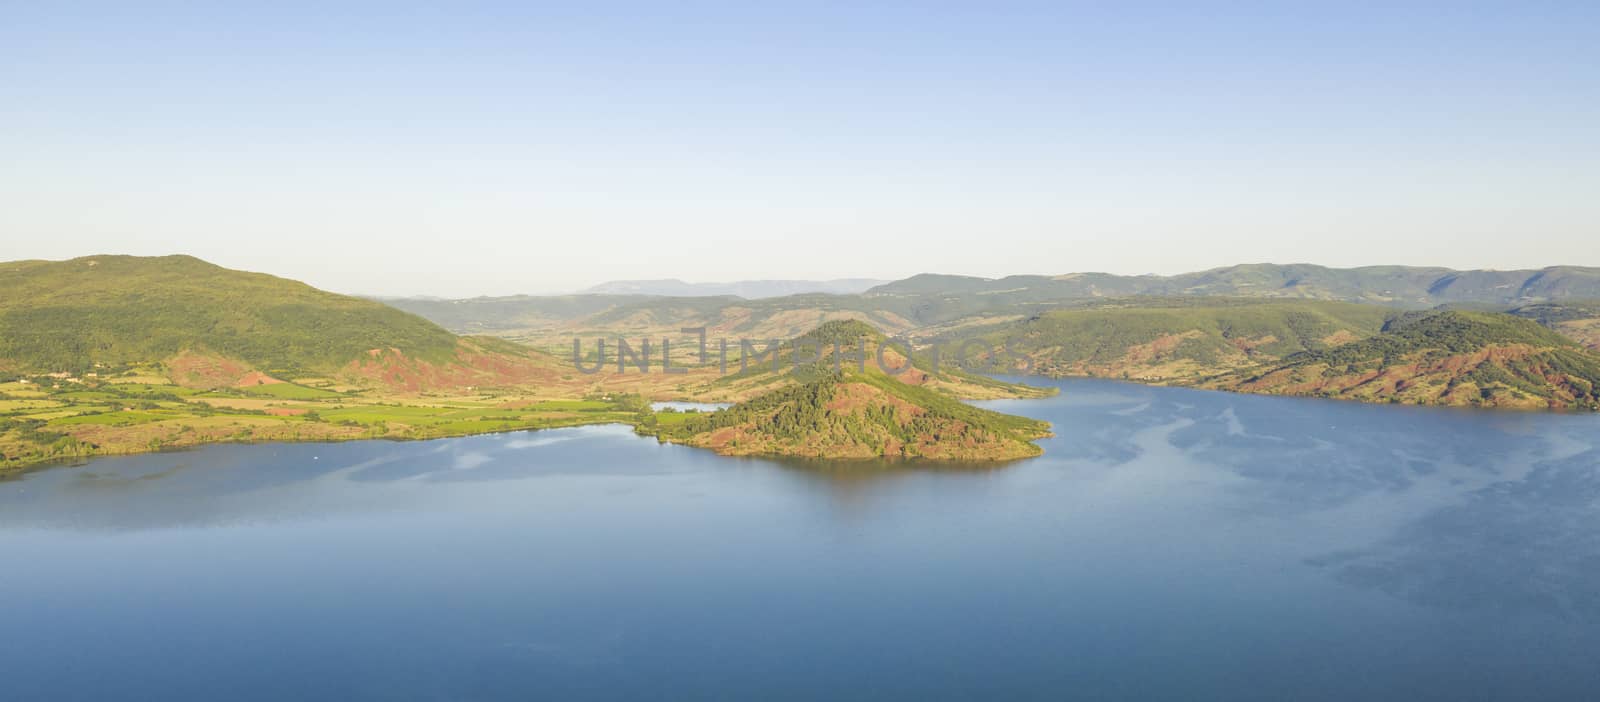 Lac du Salagou is an artificial lake located in the south of France, in the Hérault department in the Occitanie region